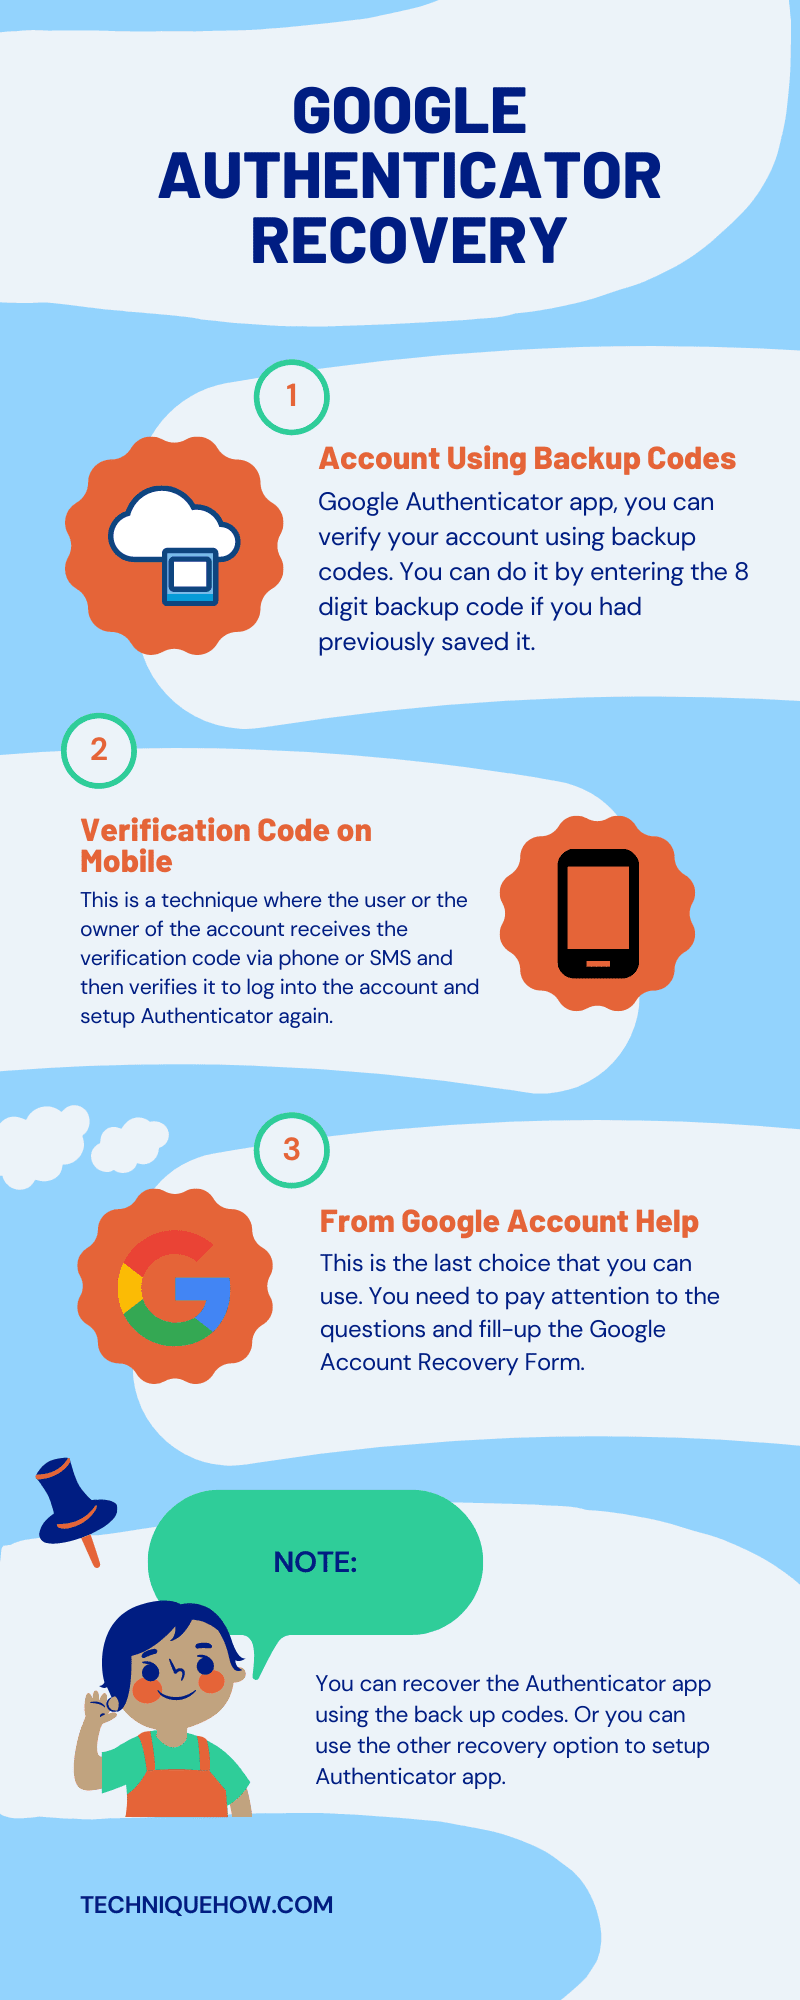 Infographic_Google authenticator recovery